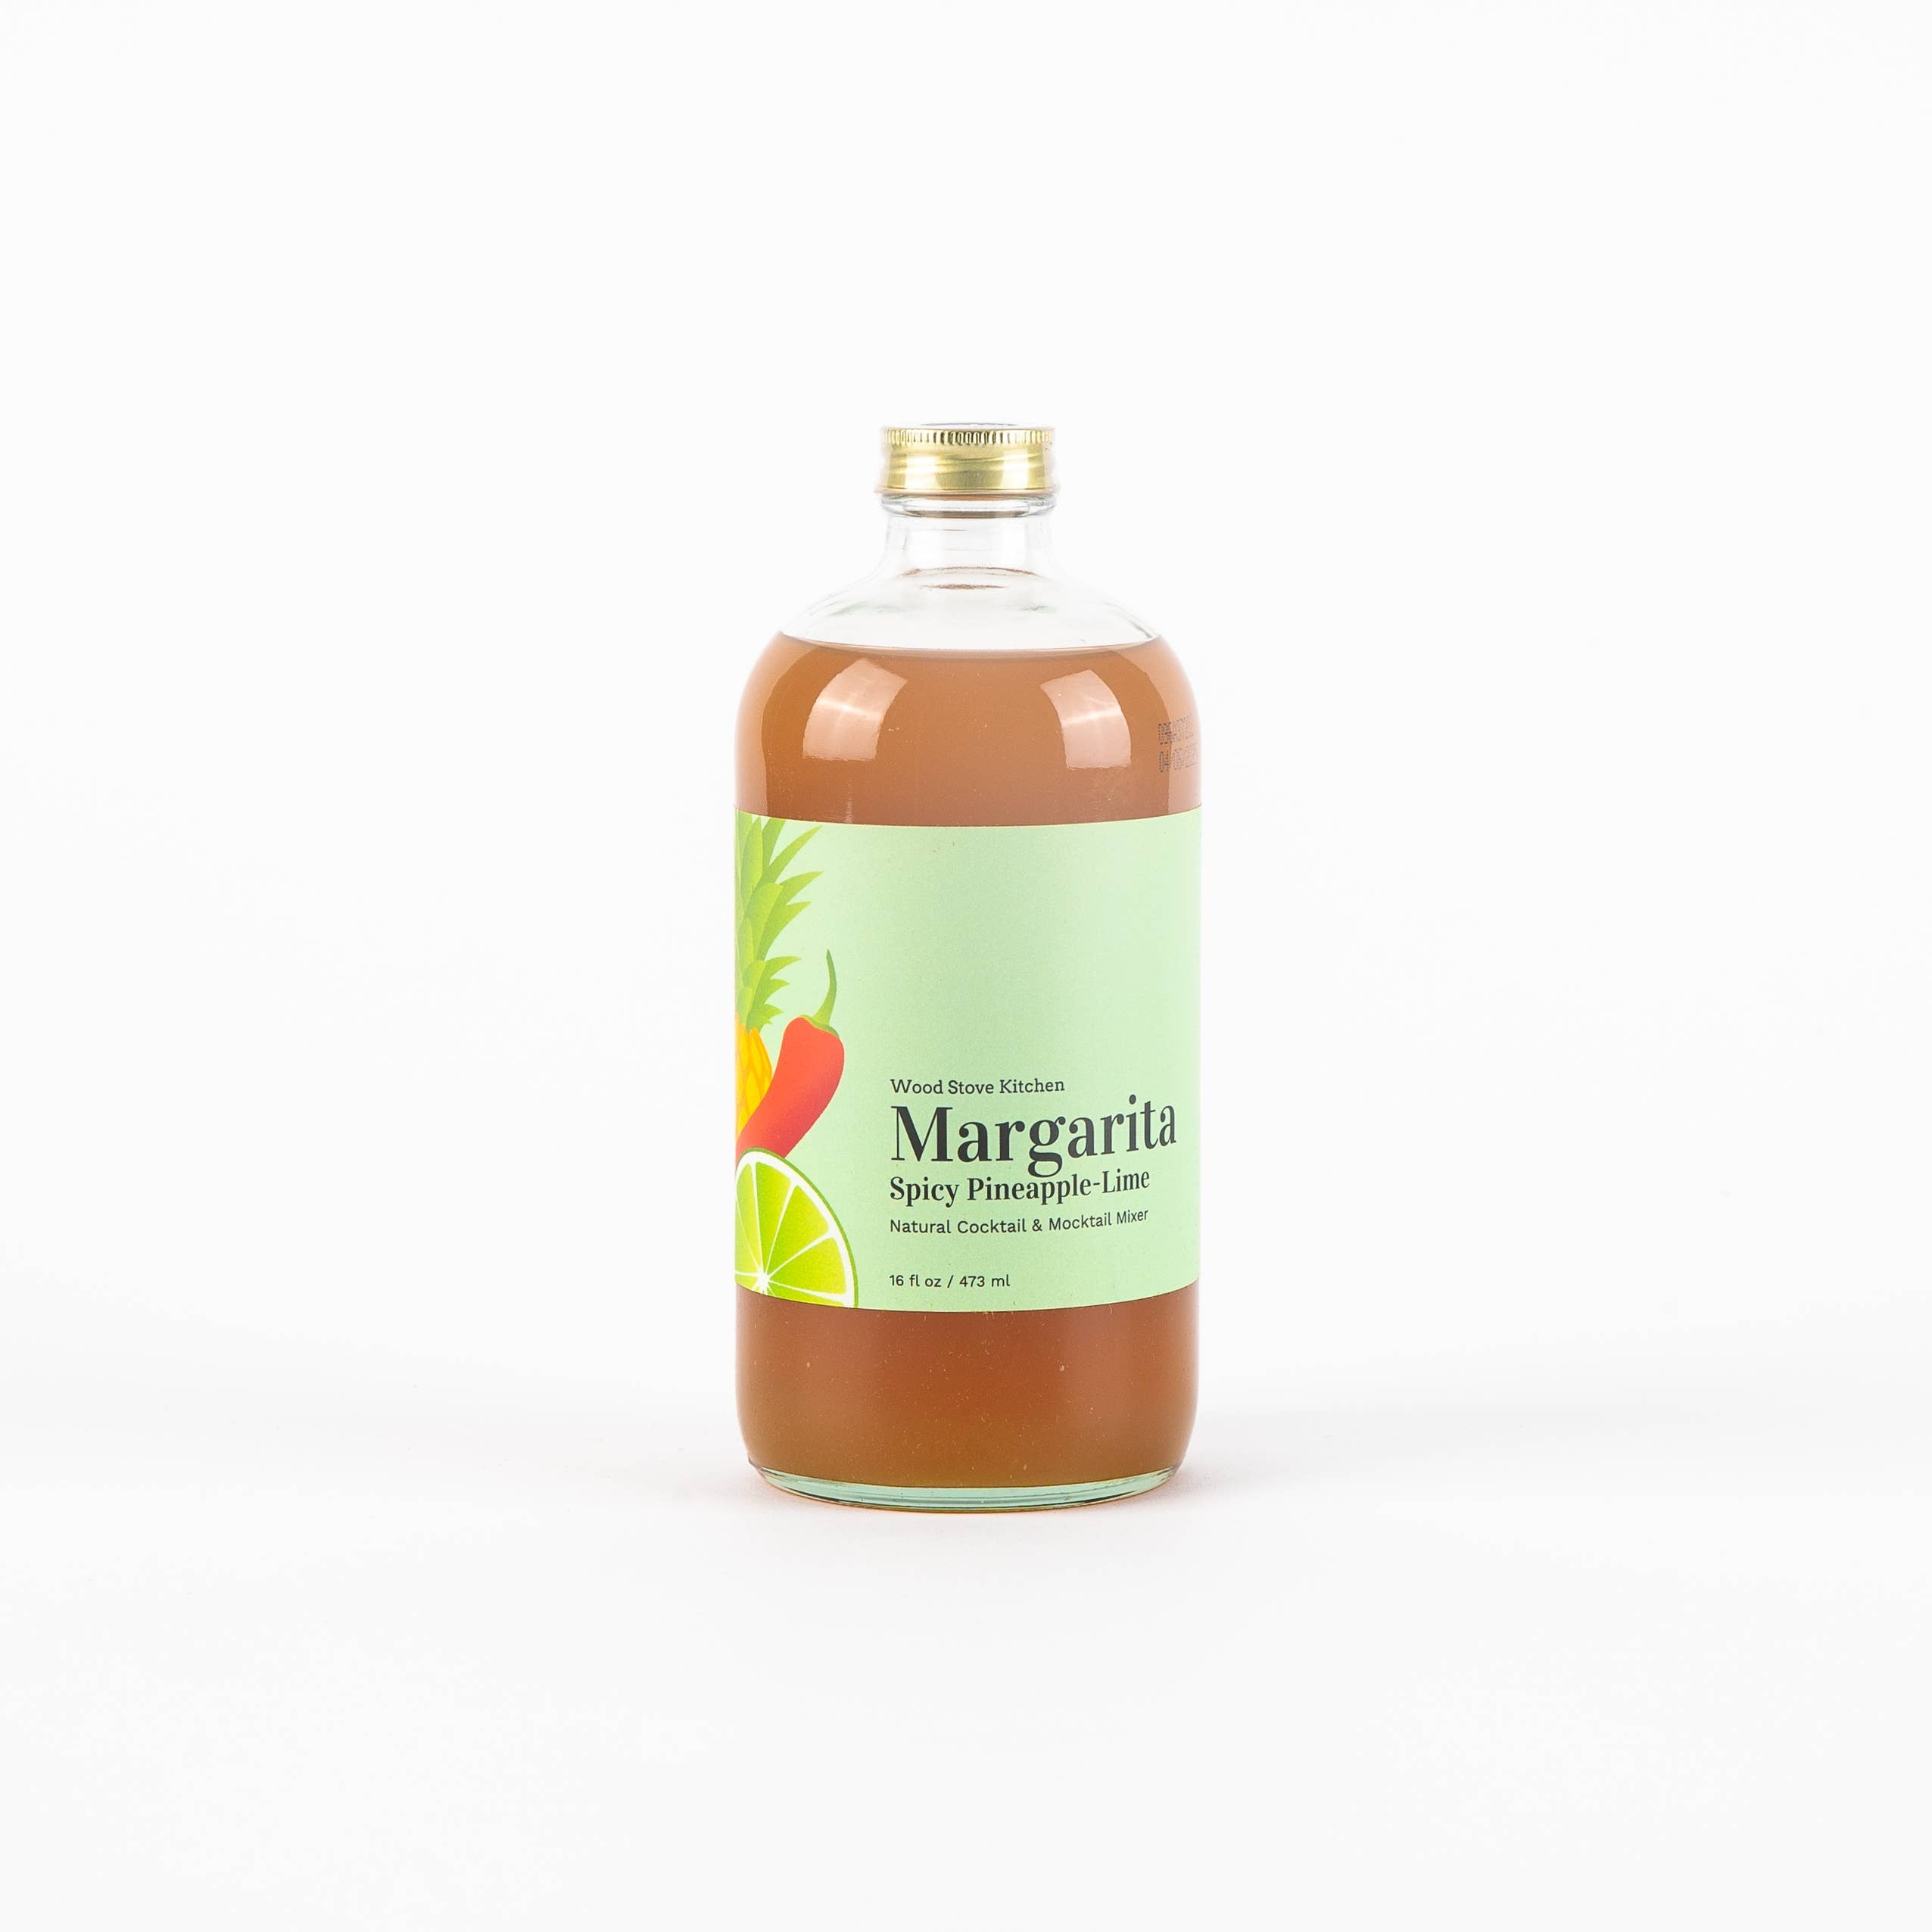 Margarita - Spicy Pineapple & Lime Mixer